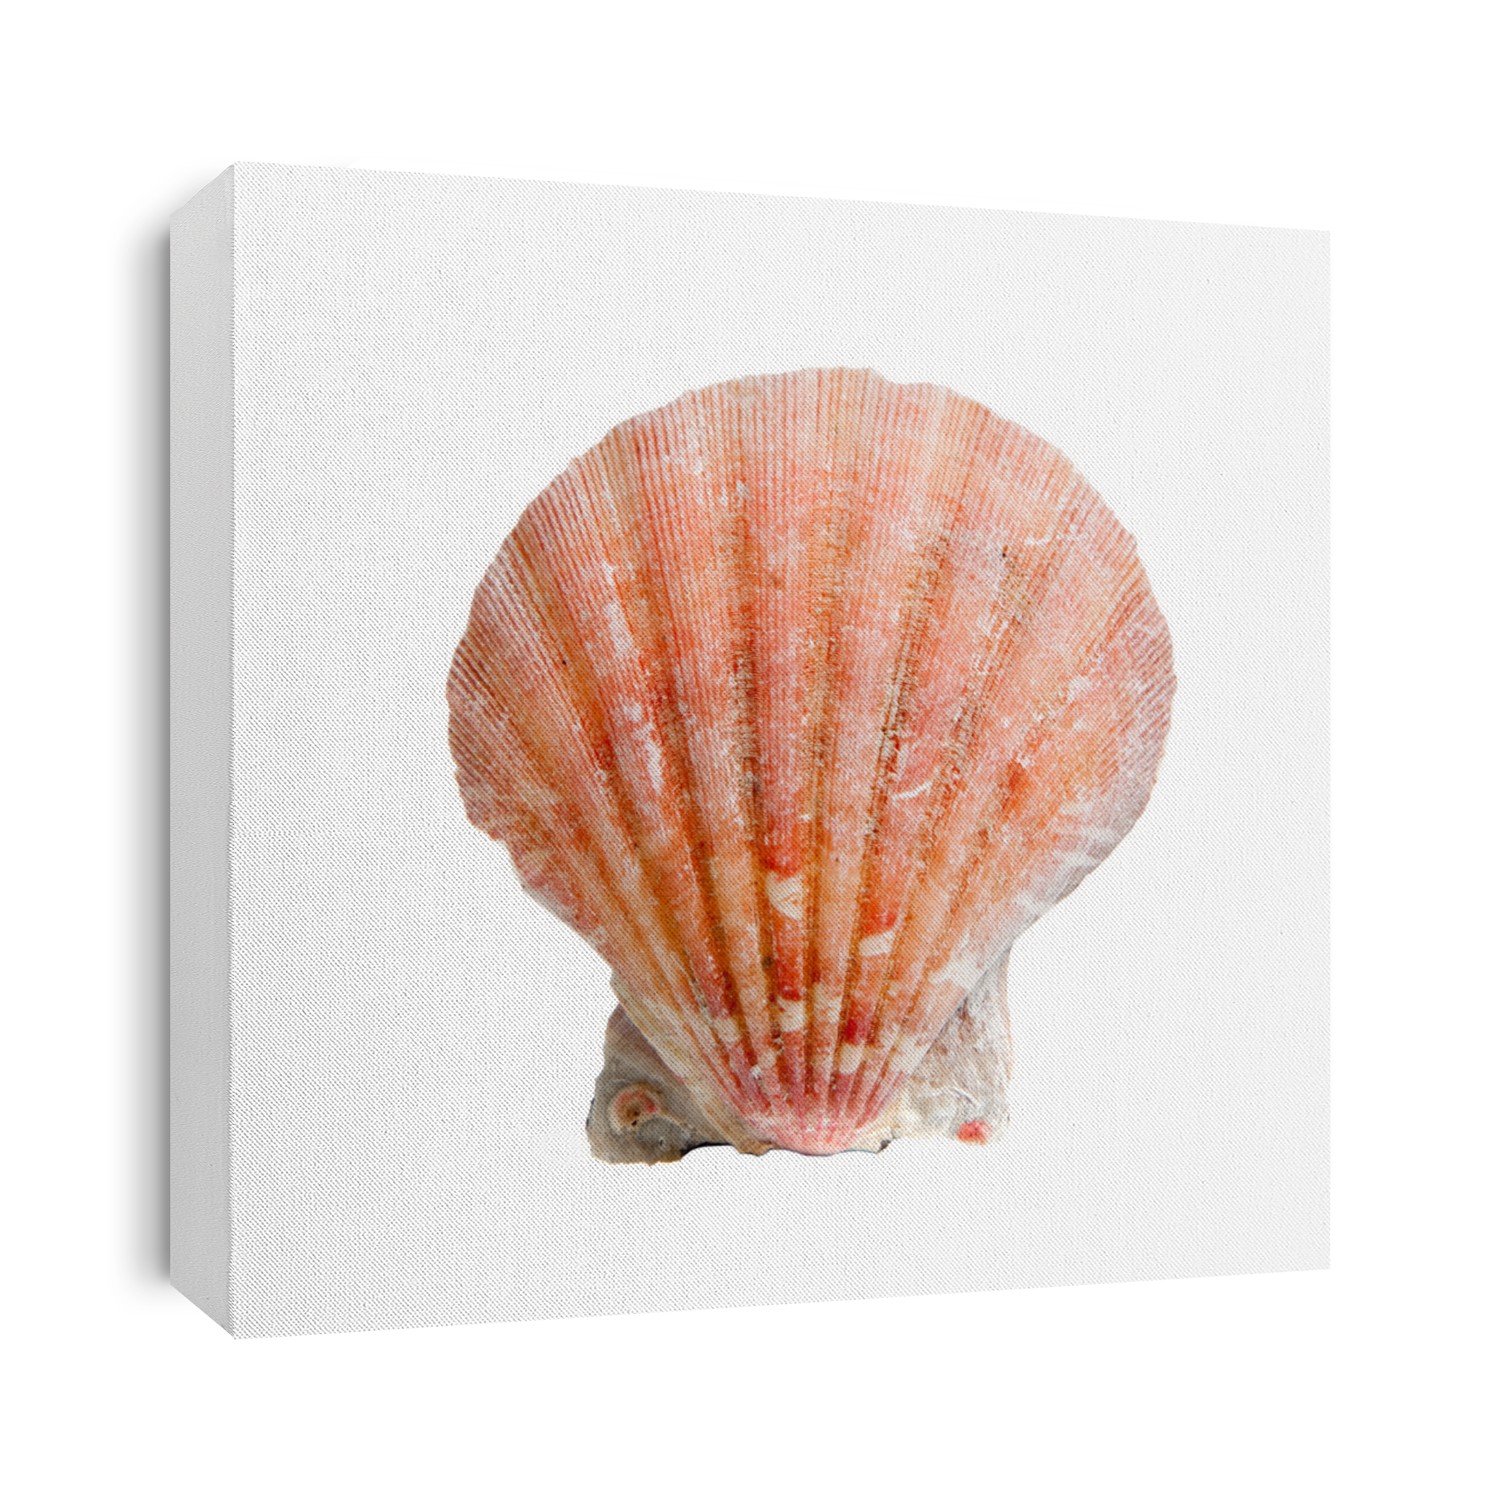 A sea shell scallop shell on a white background